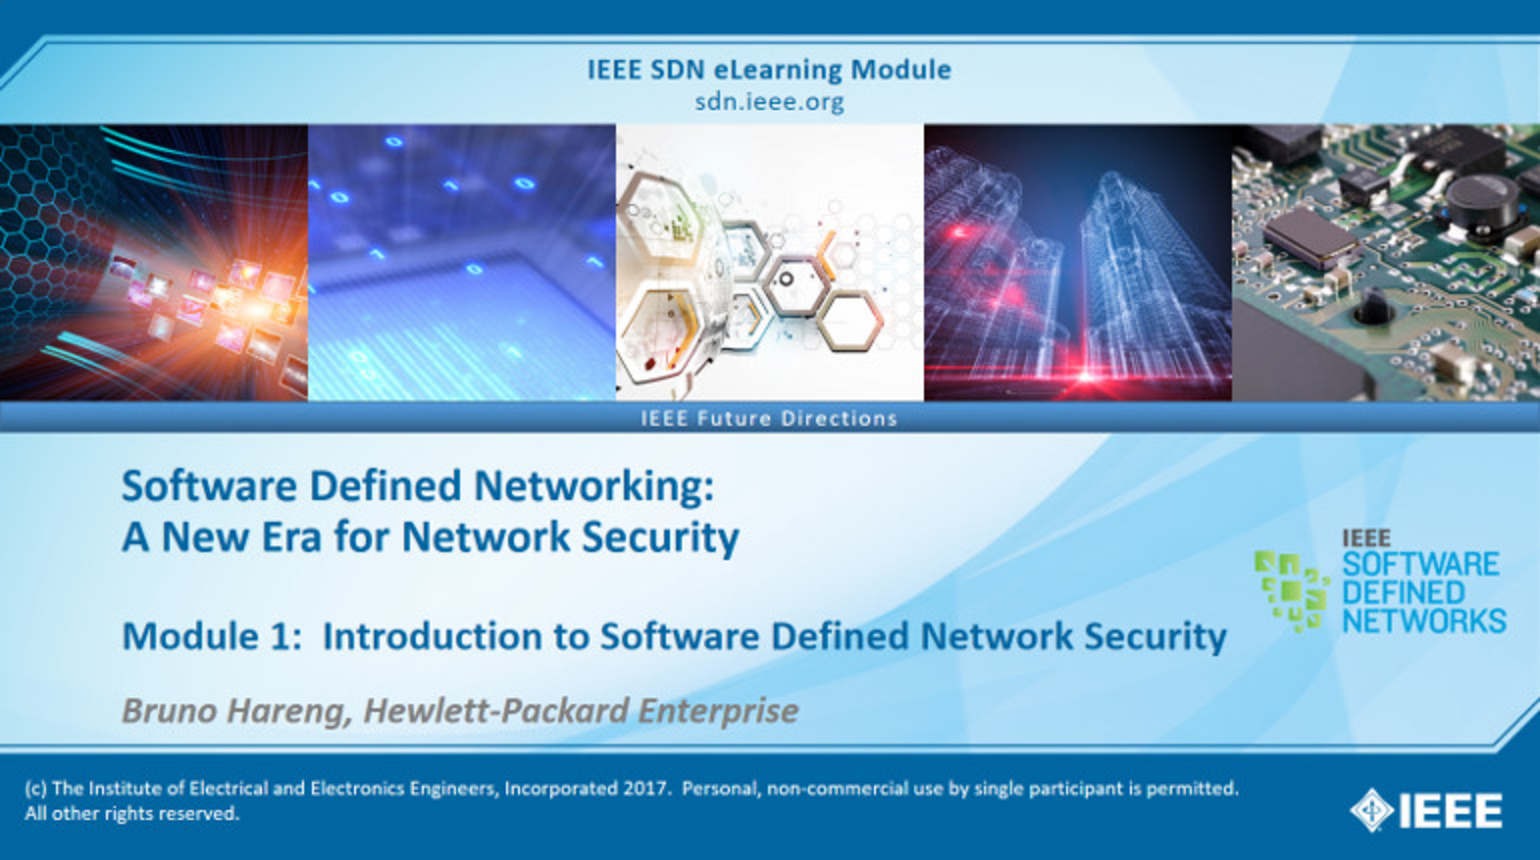 IEEE SDN: SDN and Security Module 1 - An Introduction to Software Defined Network Security